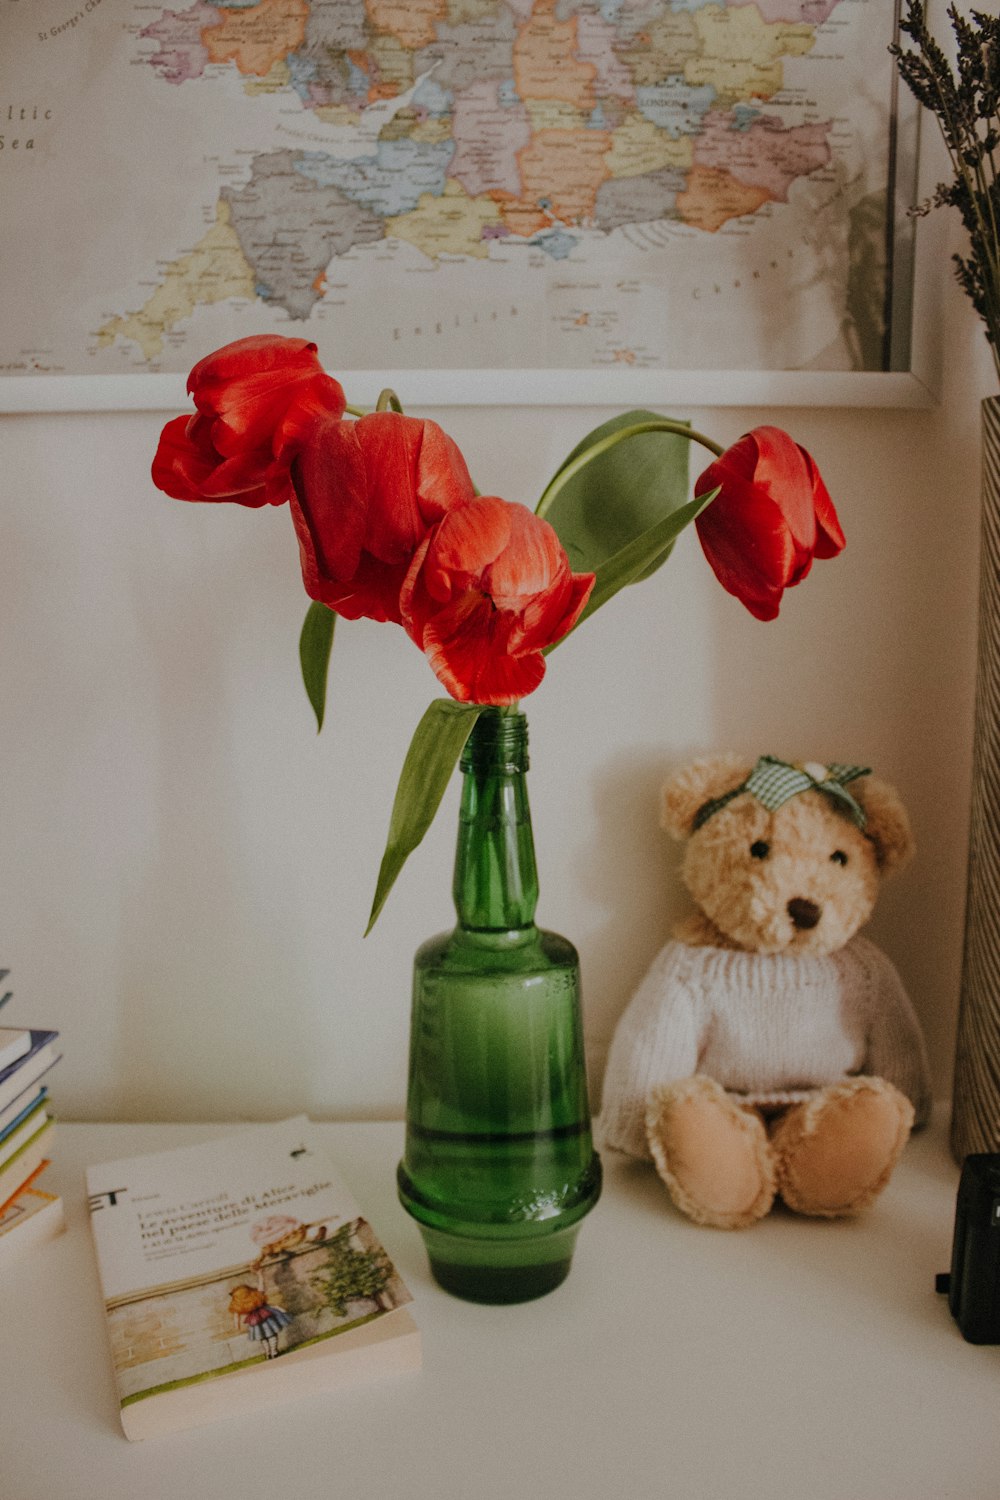 a teddy bear sitting next to a green vase with red flowers